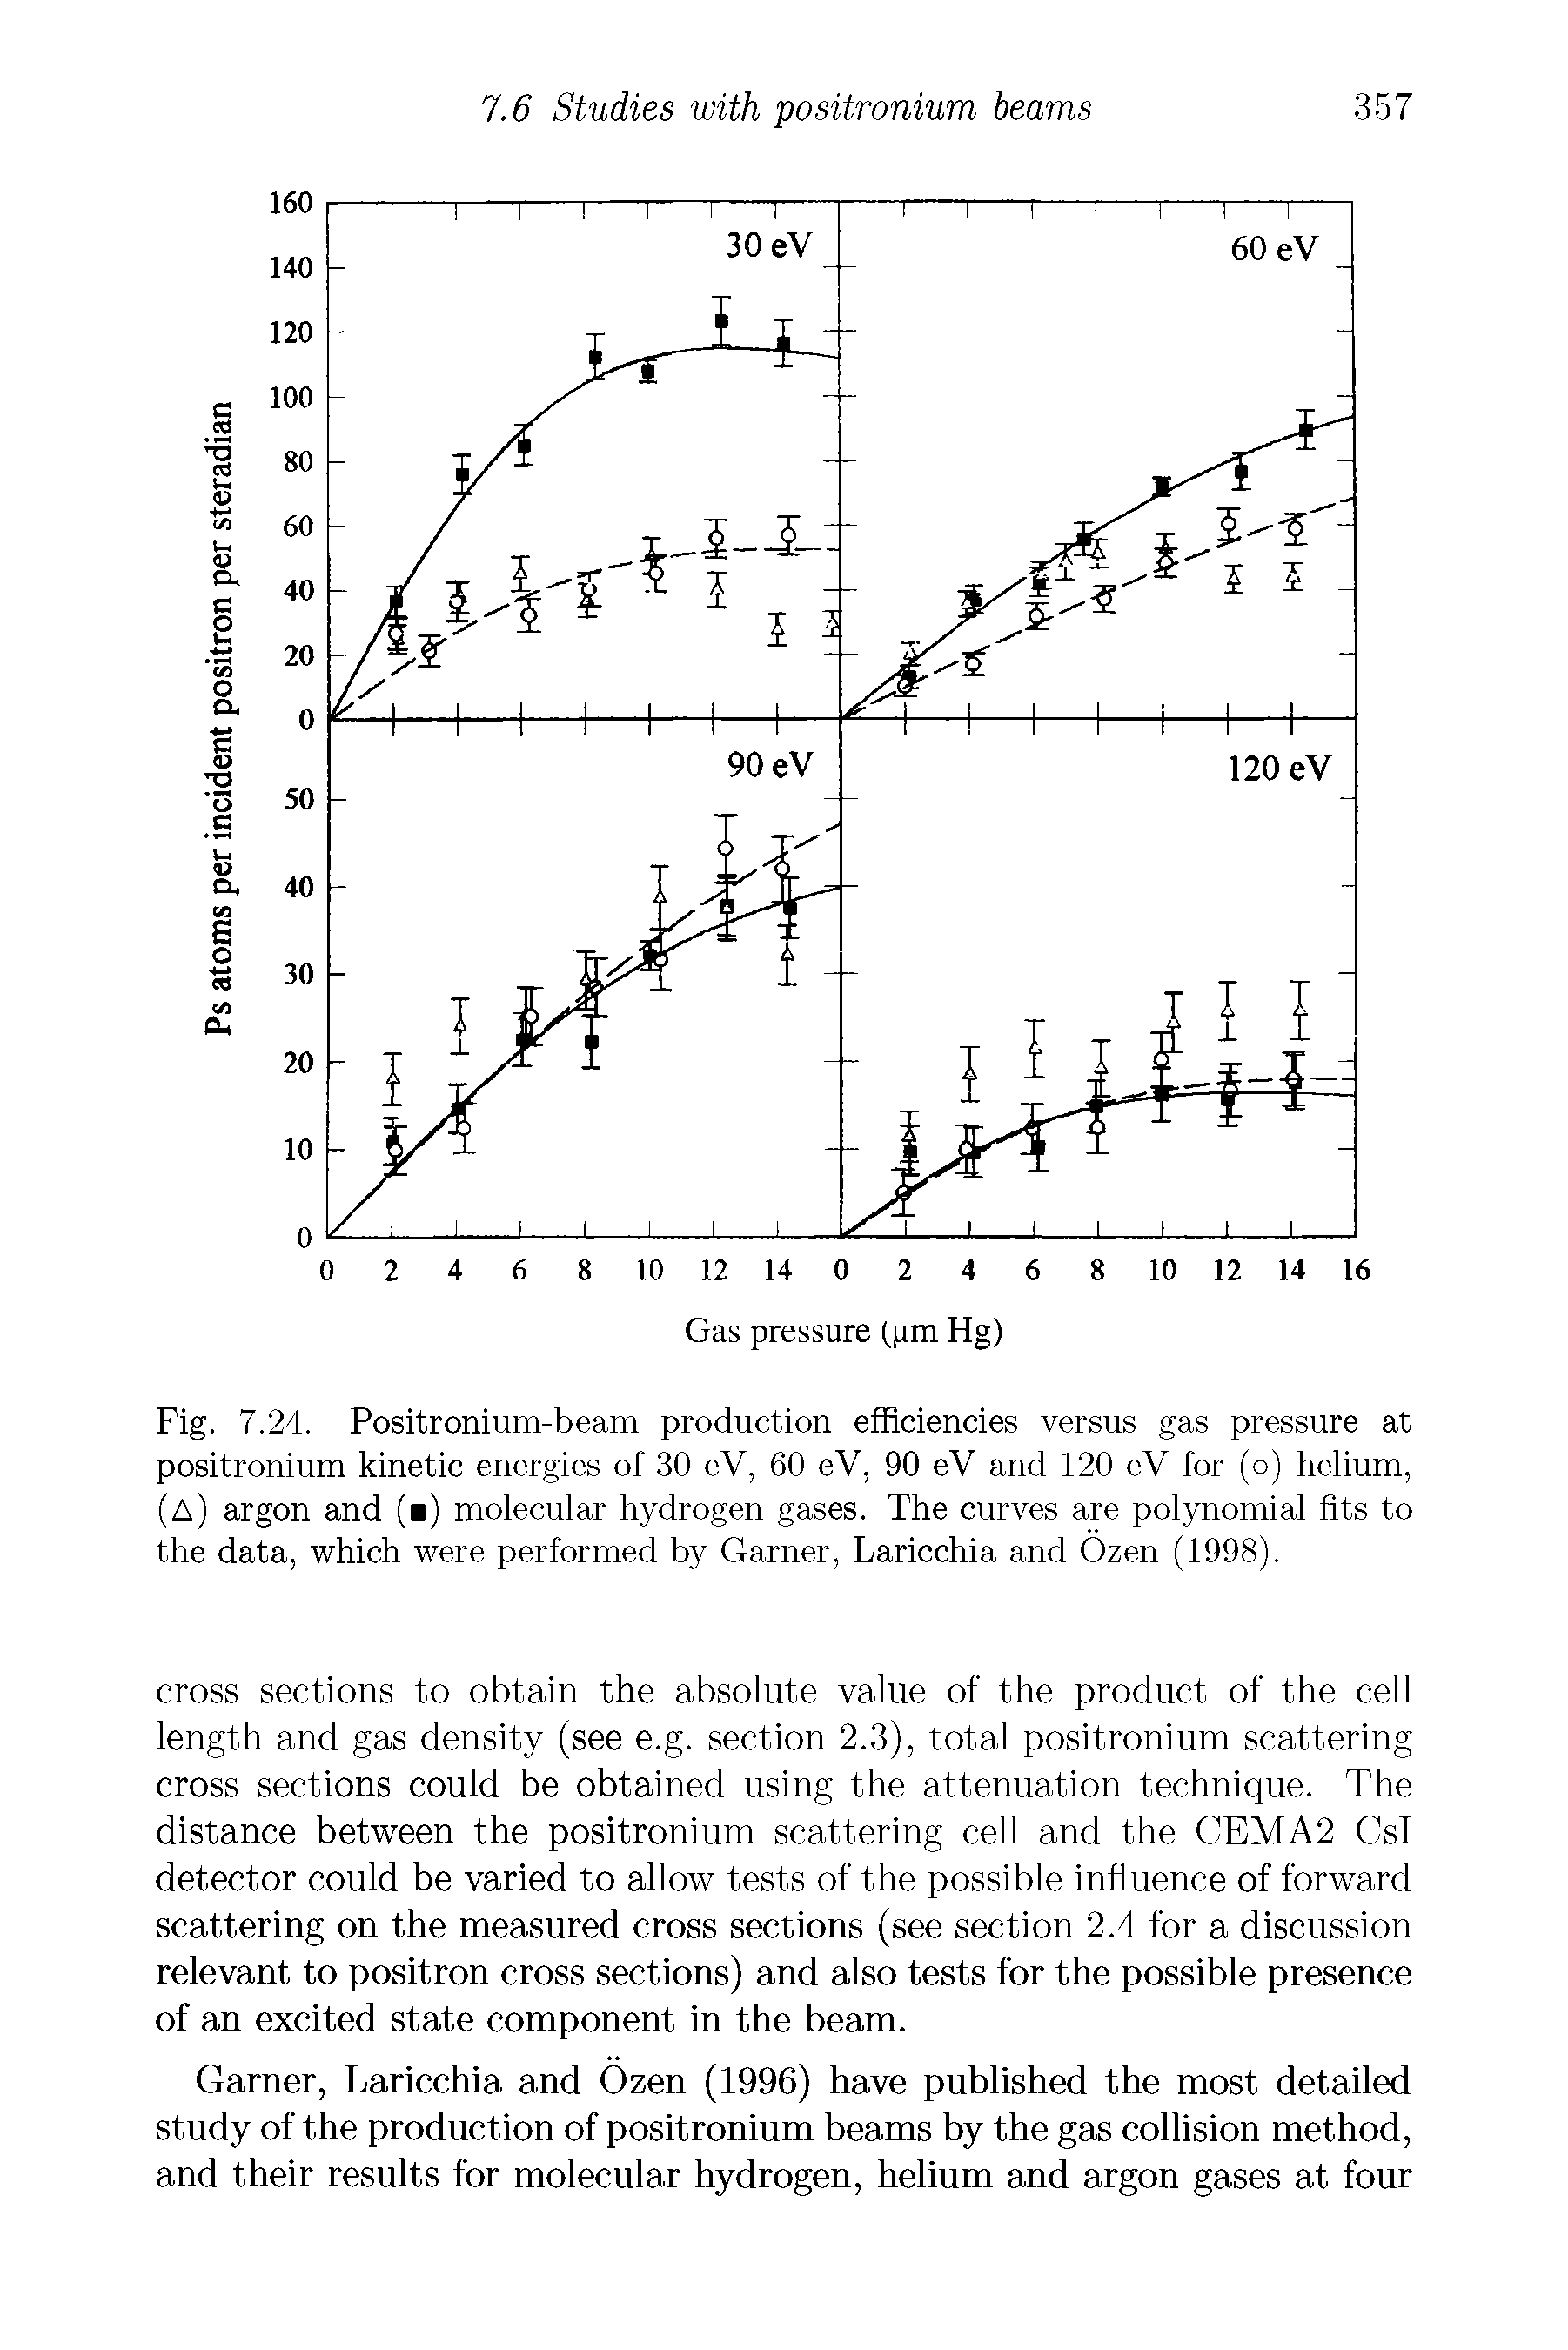 Fig. 7.24. Positronium-beam production efficiencies versus gas pressure at positronium kinetic energies of 30 eV, 60 eV, 90 eV and 120 eV for (o) helium, (A) argon and ( ) molecular hydrogen gases. The curves are polynomial fits to the data, which were performed by Garner, Laricchia and Ozen (1998).